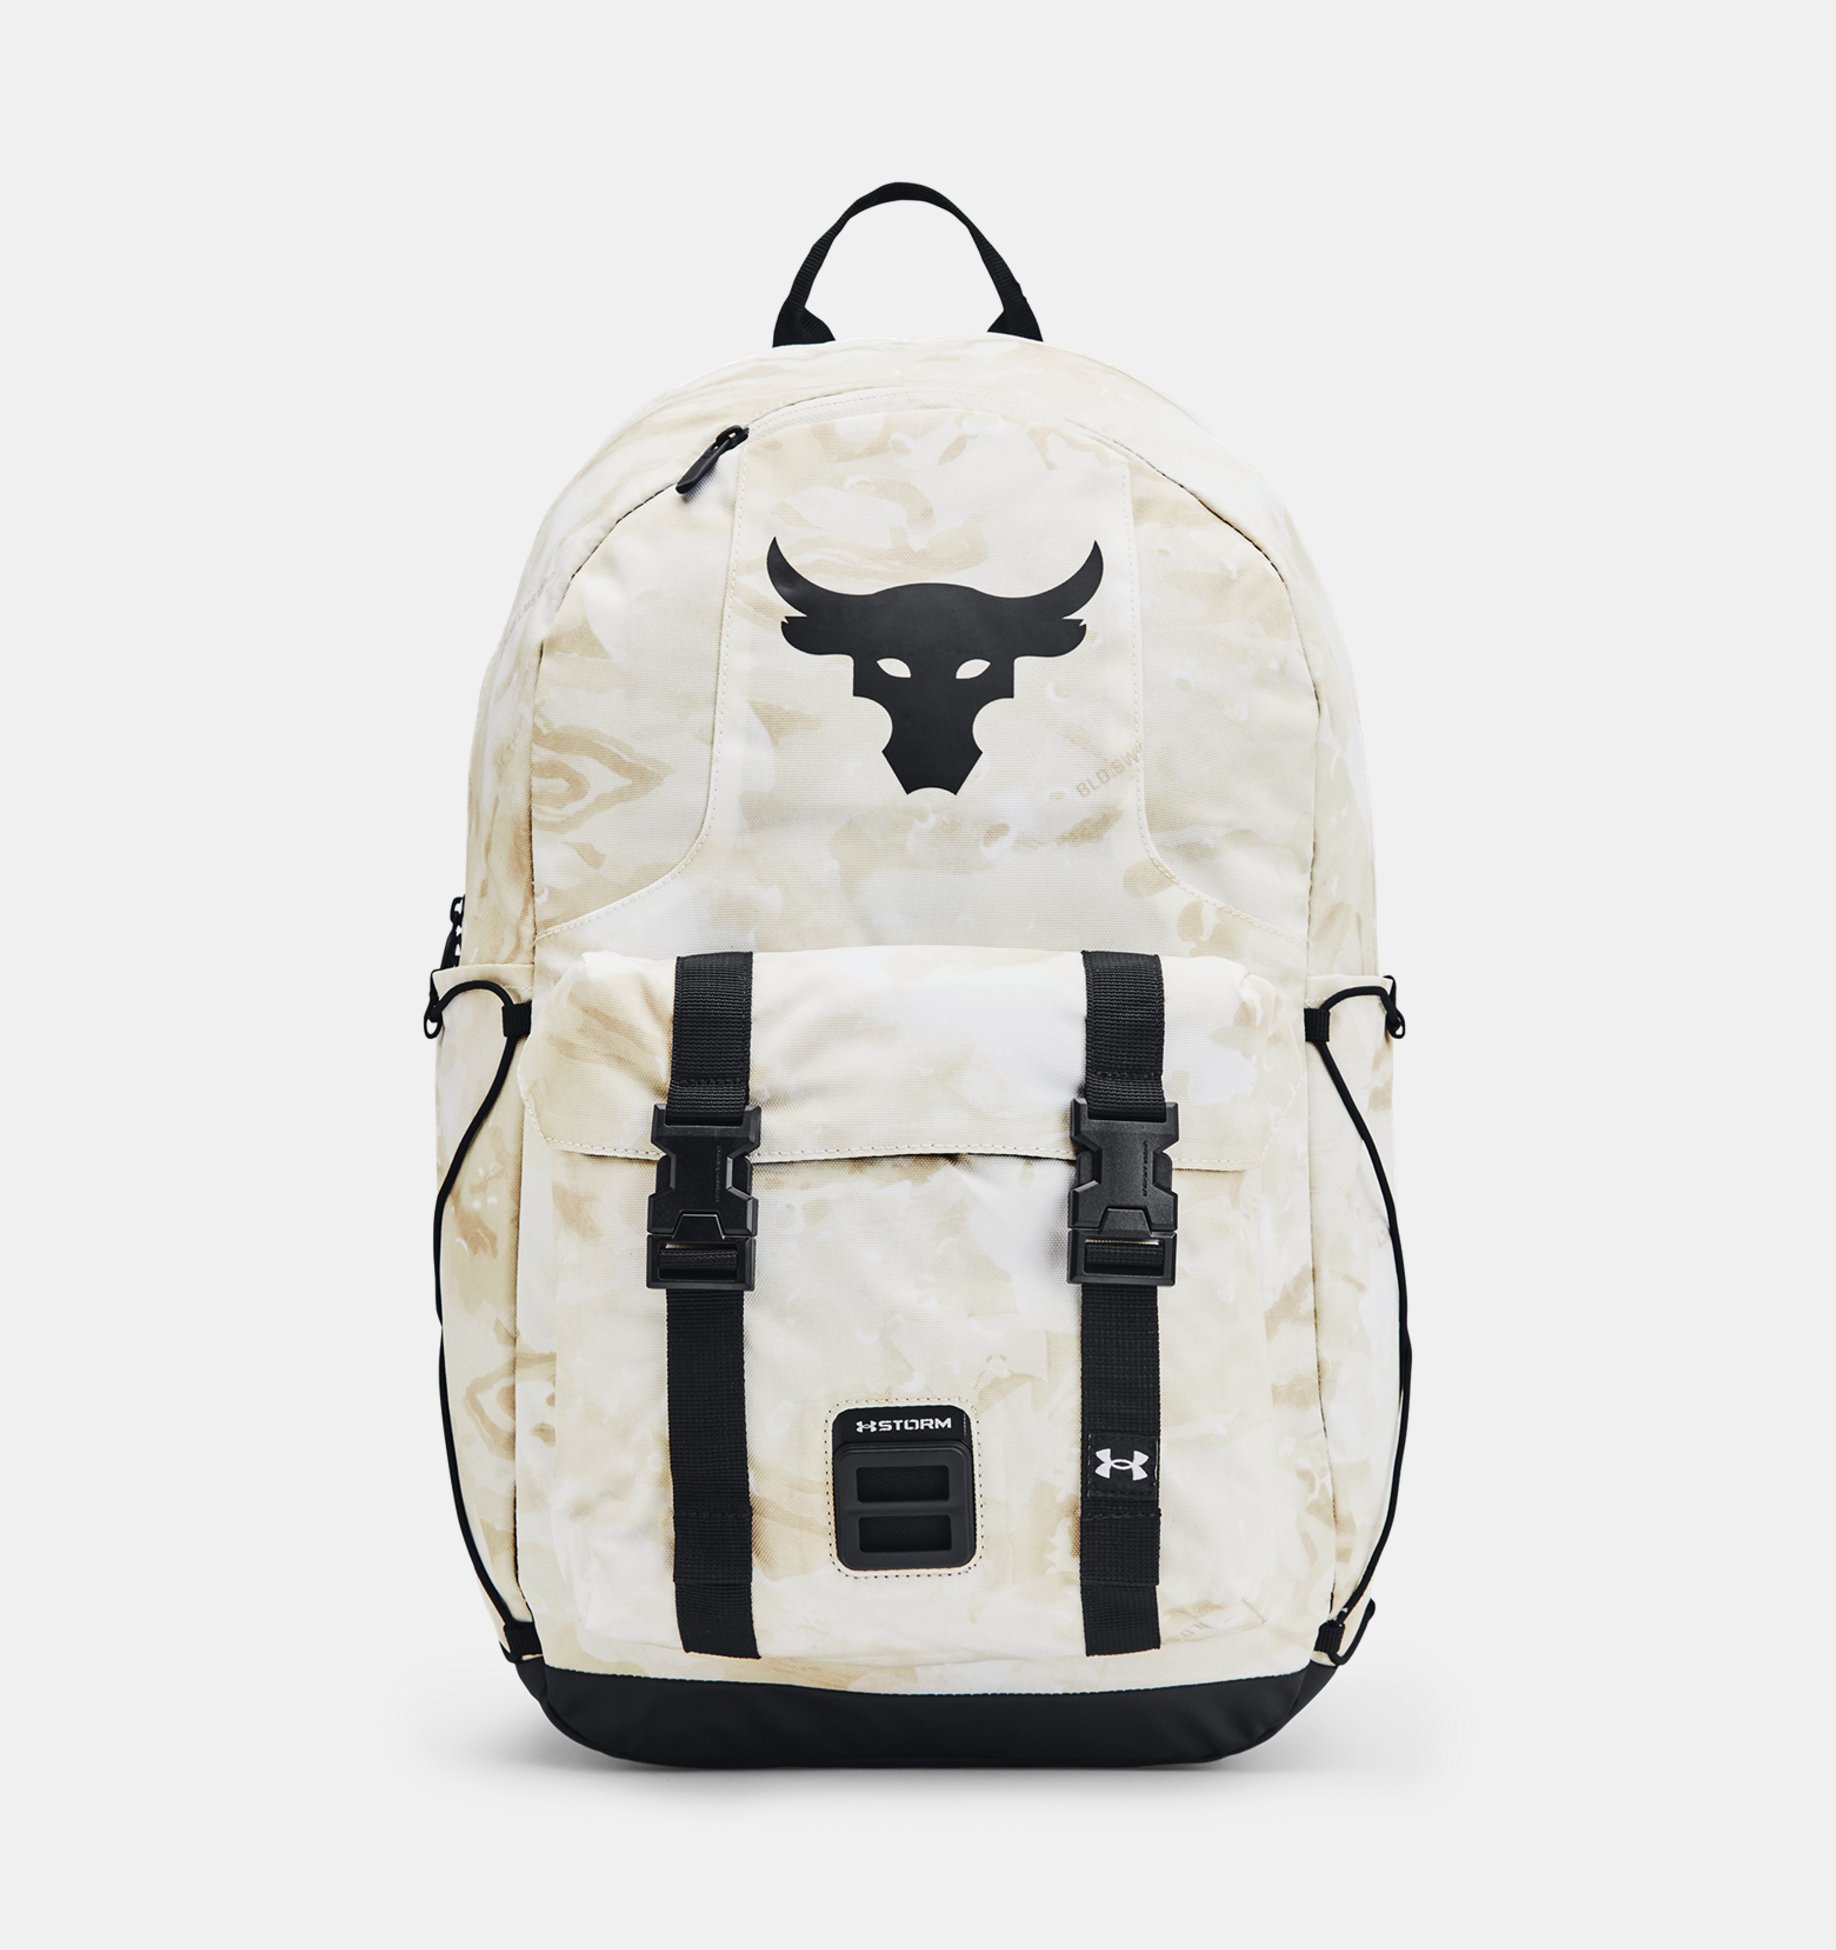 Under Armour Project 5 Backpack Rucksack School bag 